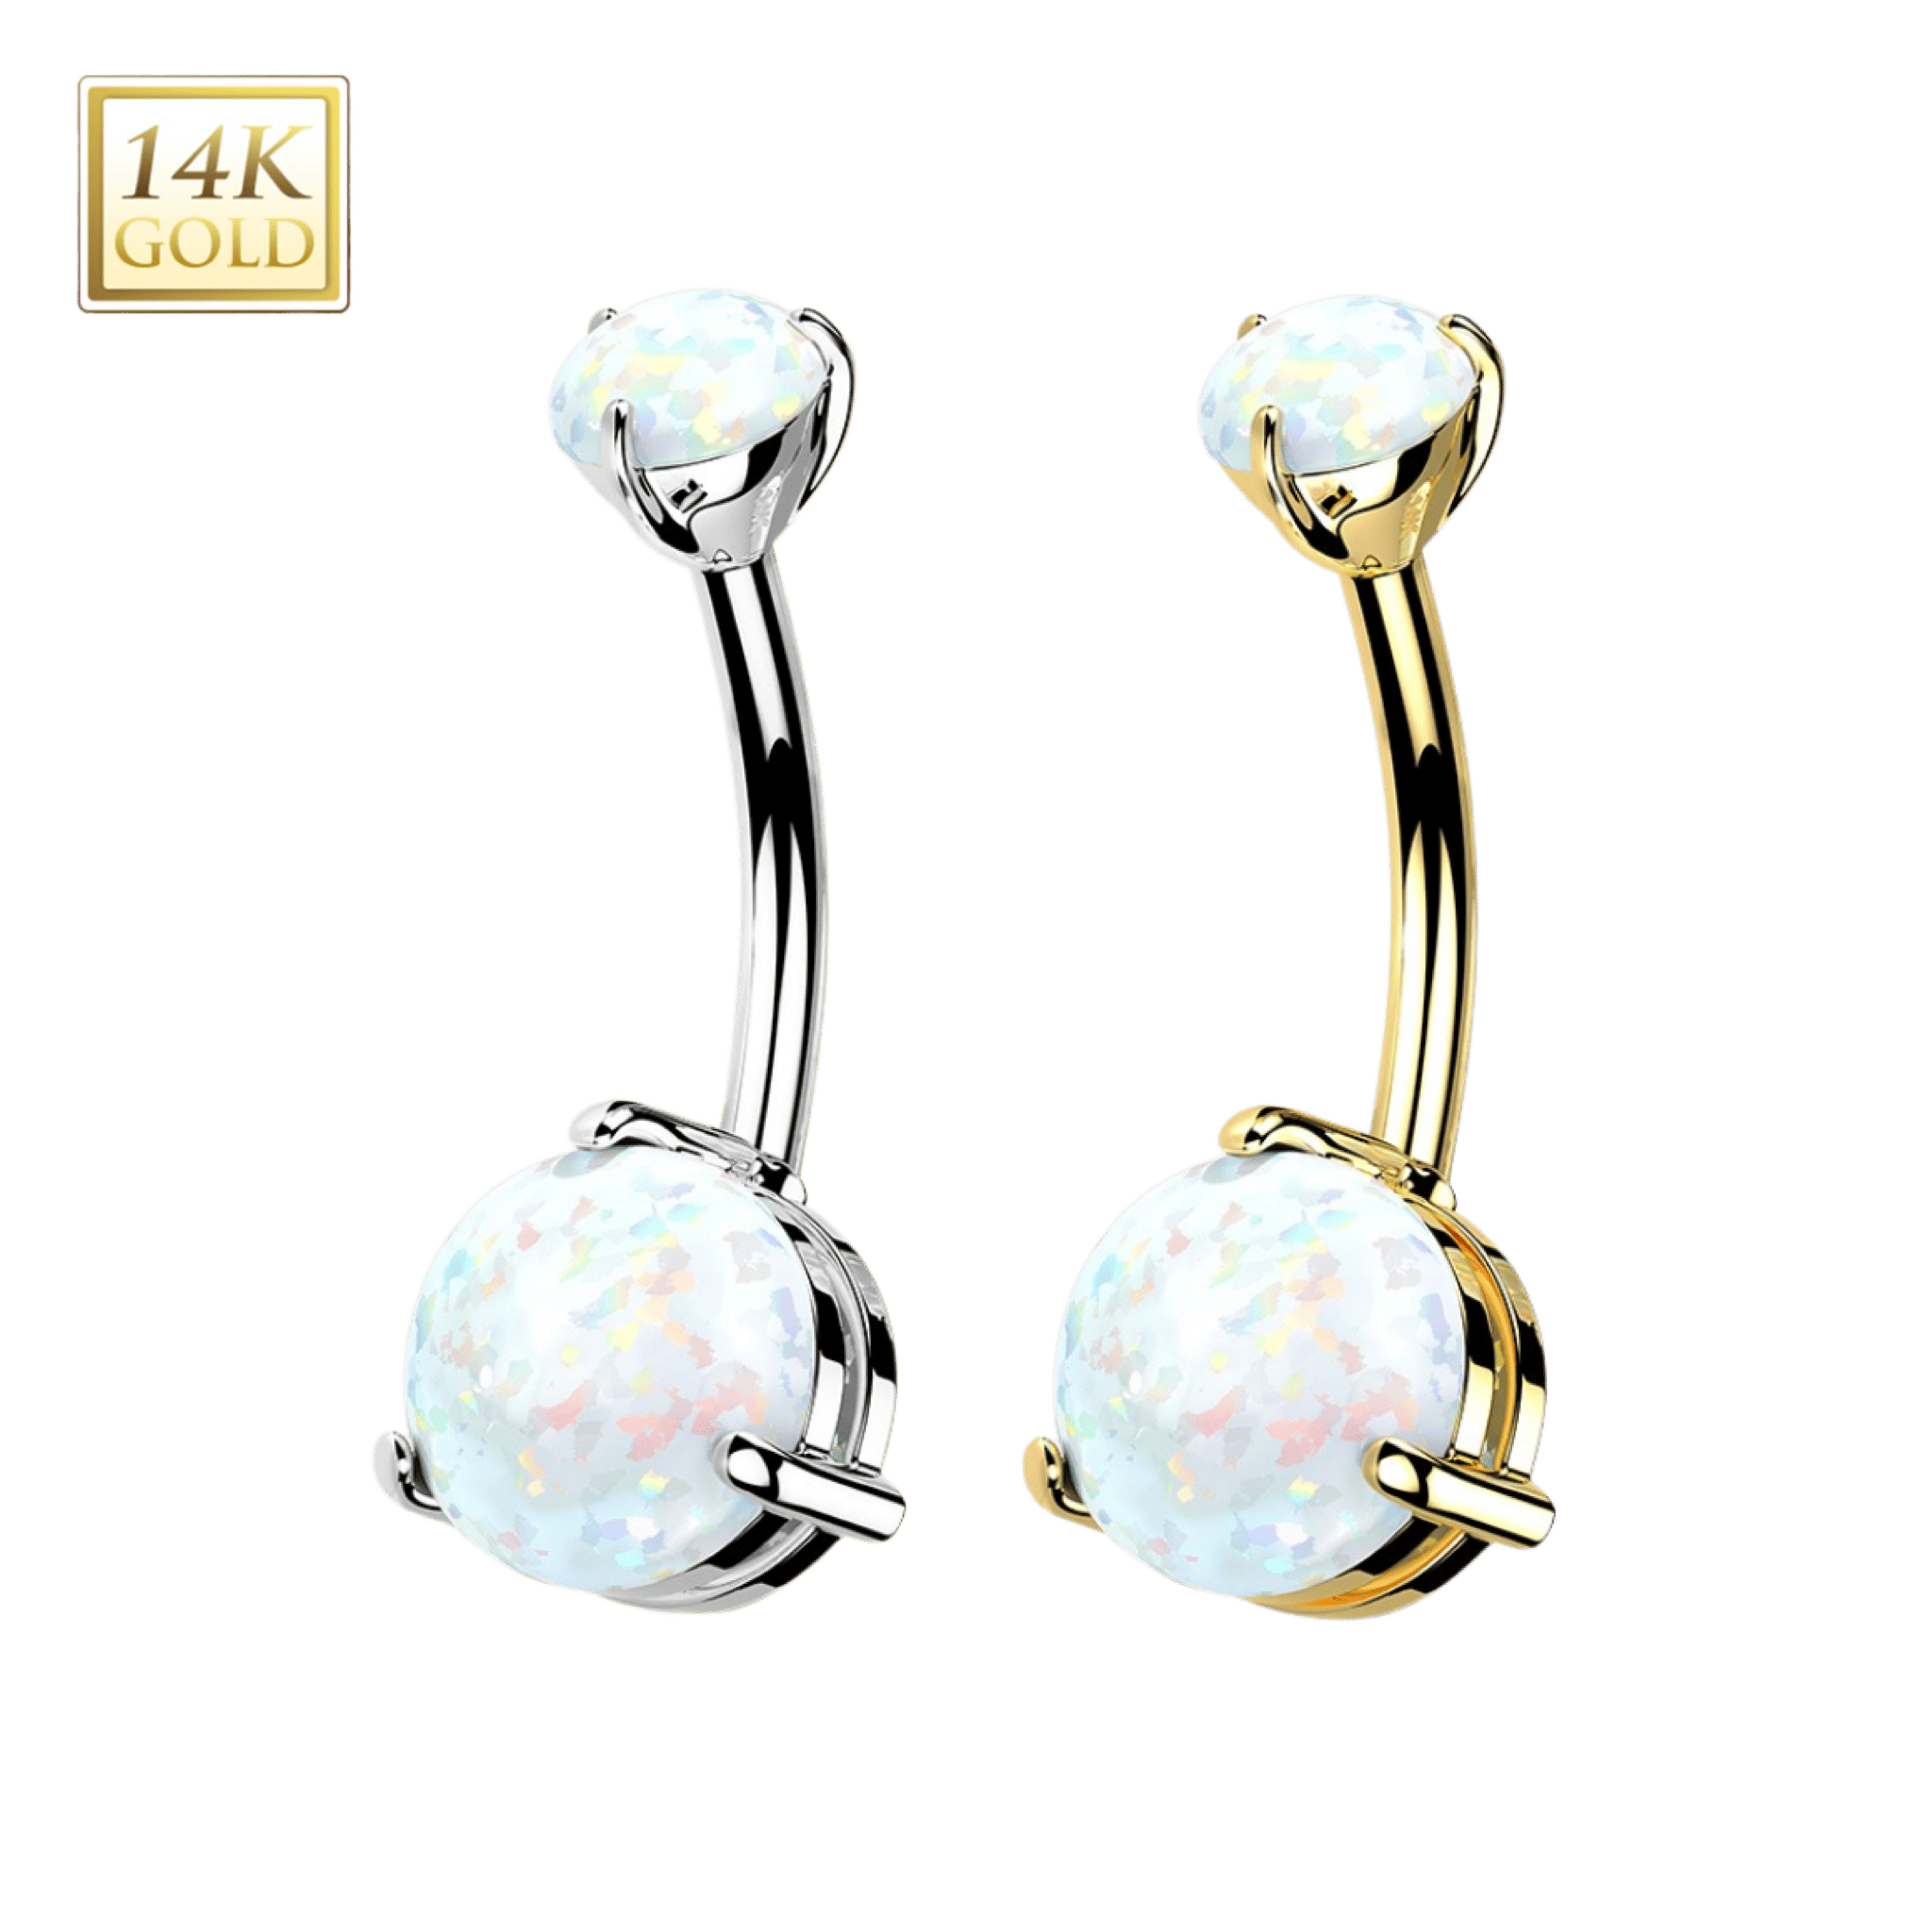 14k gold pronged opal belly button piercing jewelry